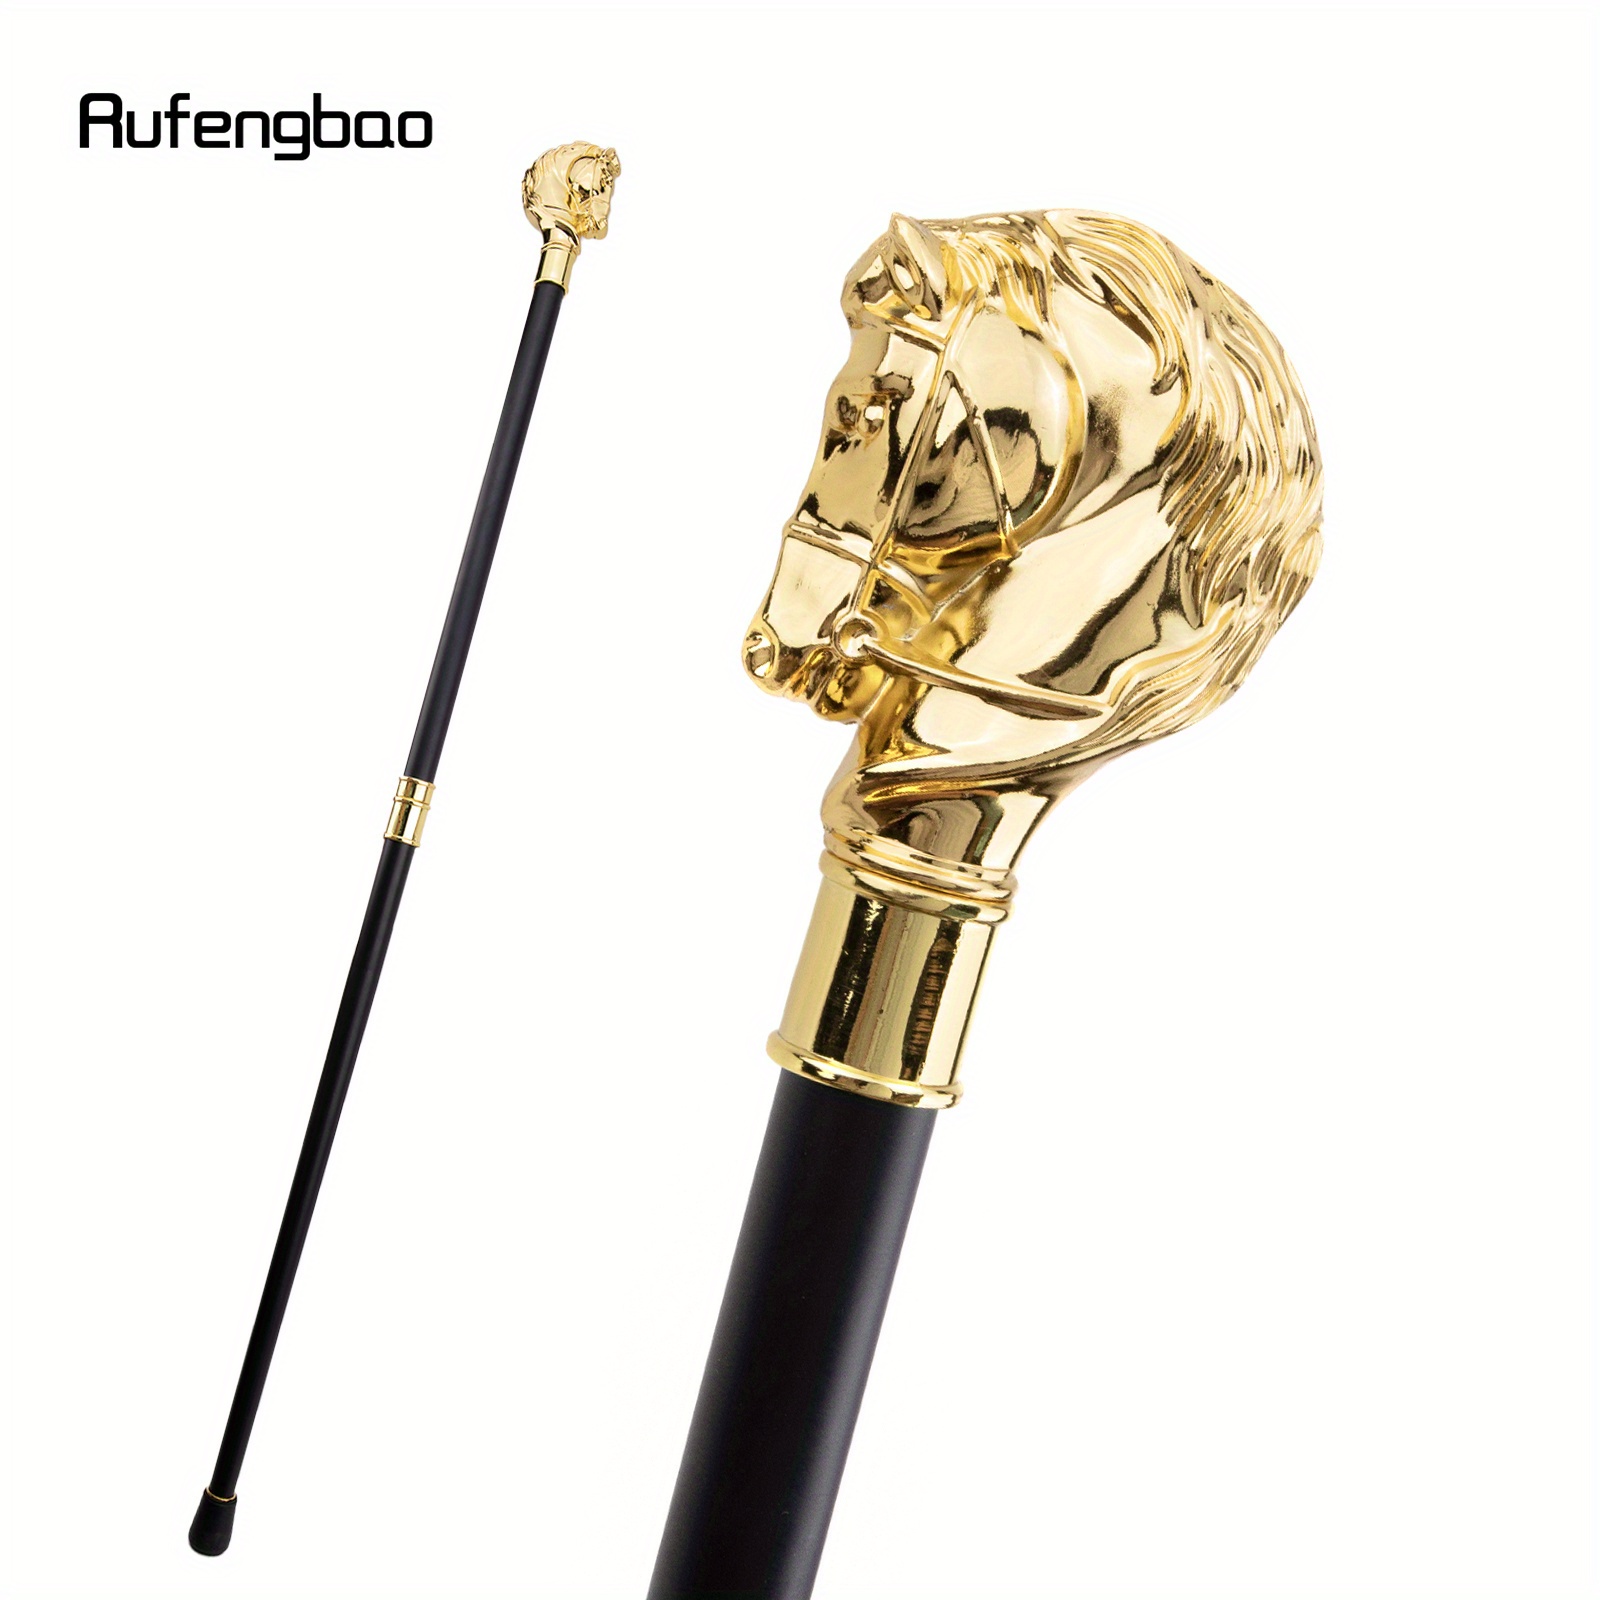  Gold Black Luxury Fox Single Joint Fashion Walking Stick  Decorative Vampire Cospaly Party Walking Cane Halloween Crosier 93cm :  Clothing, Shoes & Jewelry